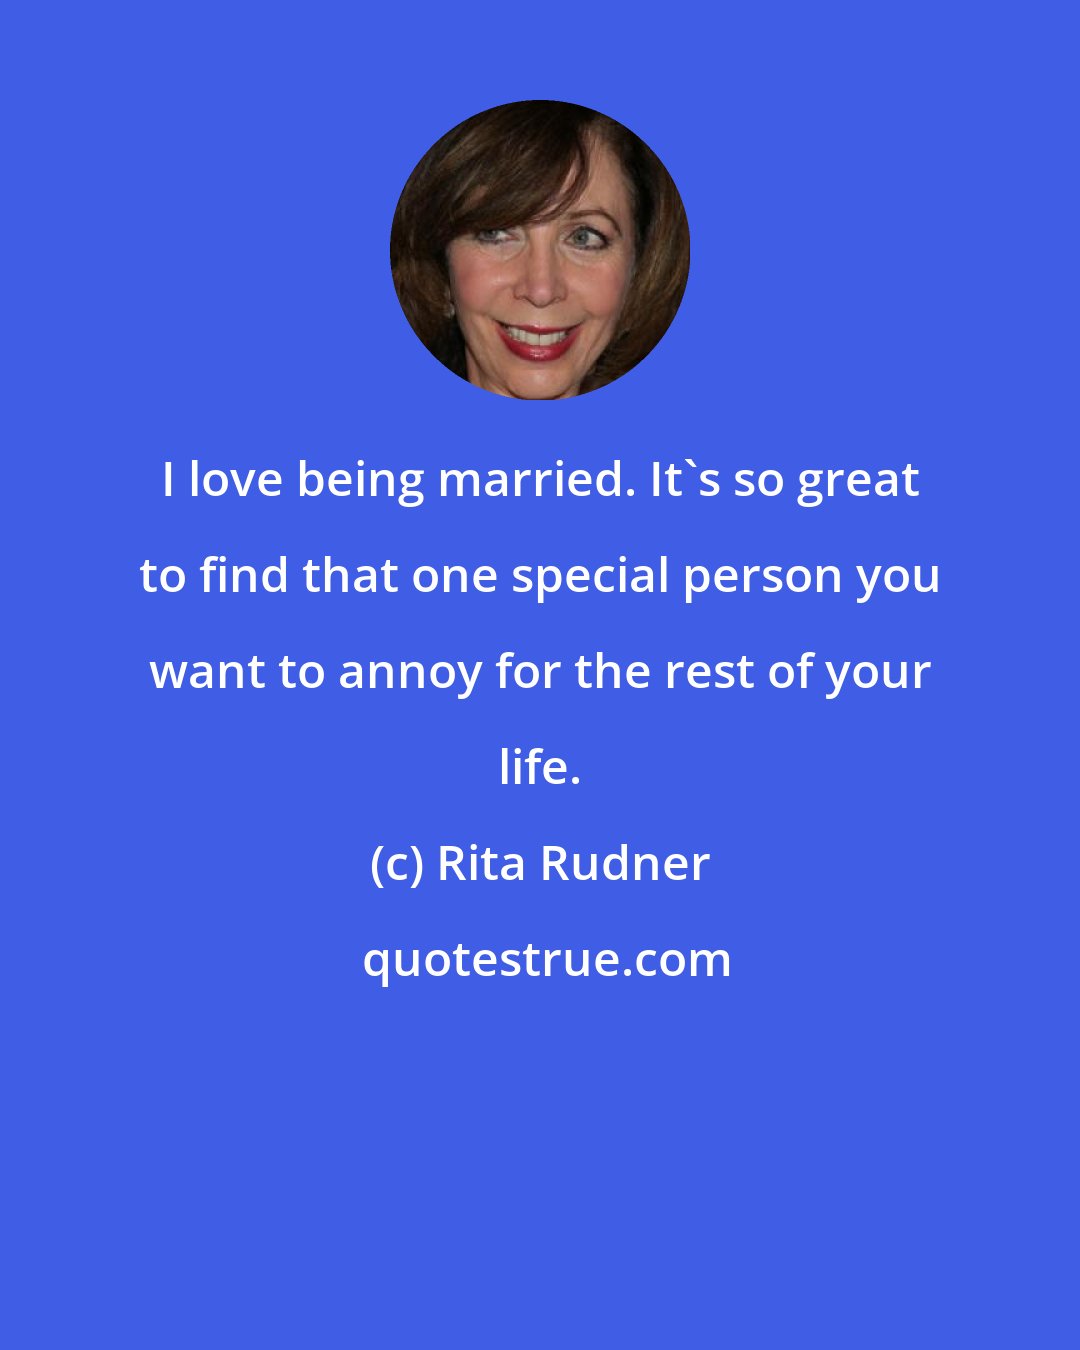 Rita Rudner: I love being married. It's so great to find that one special person you want to annoy for the rest of your life.